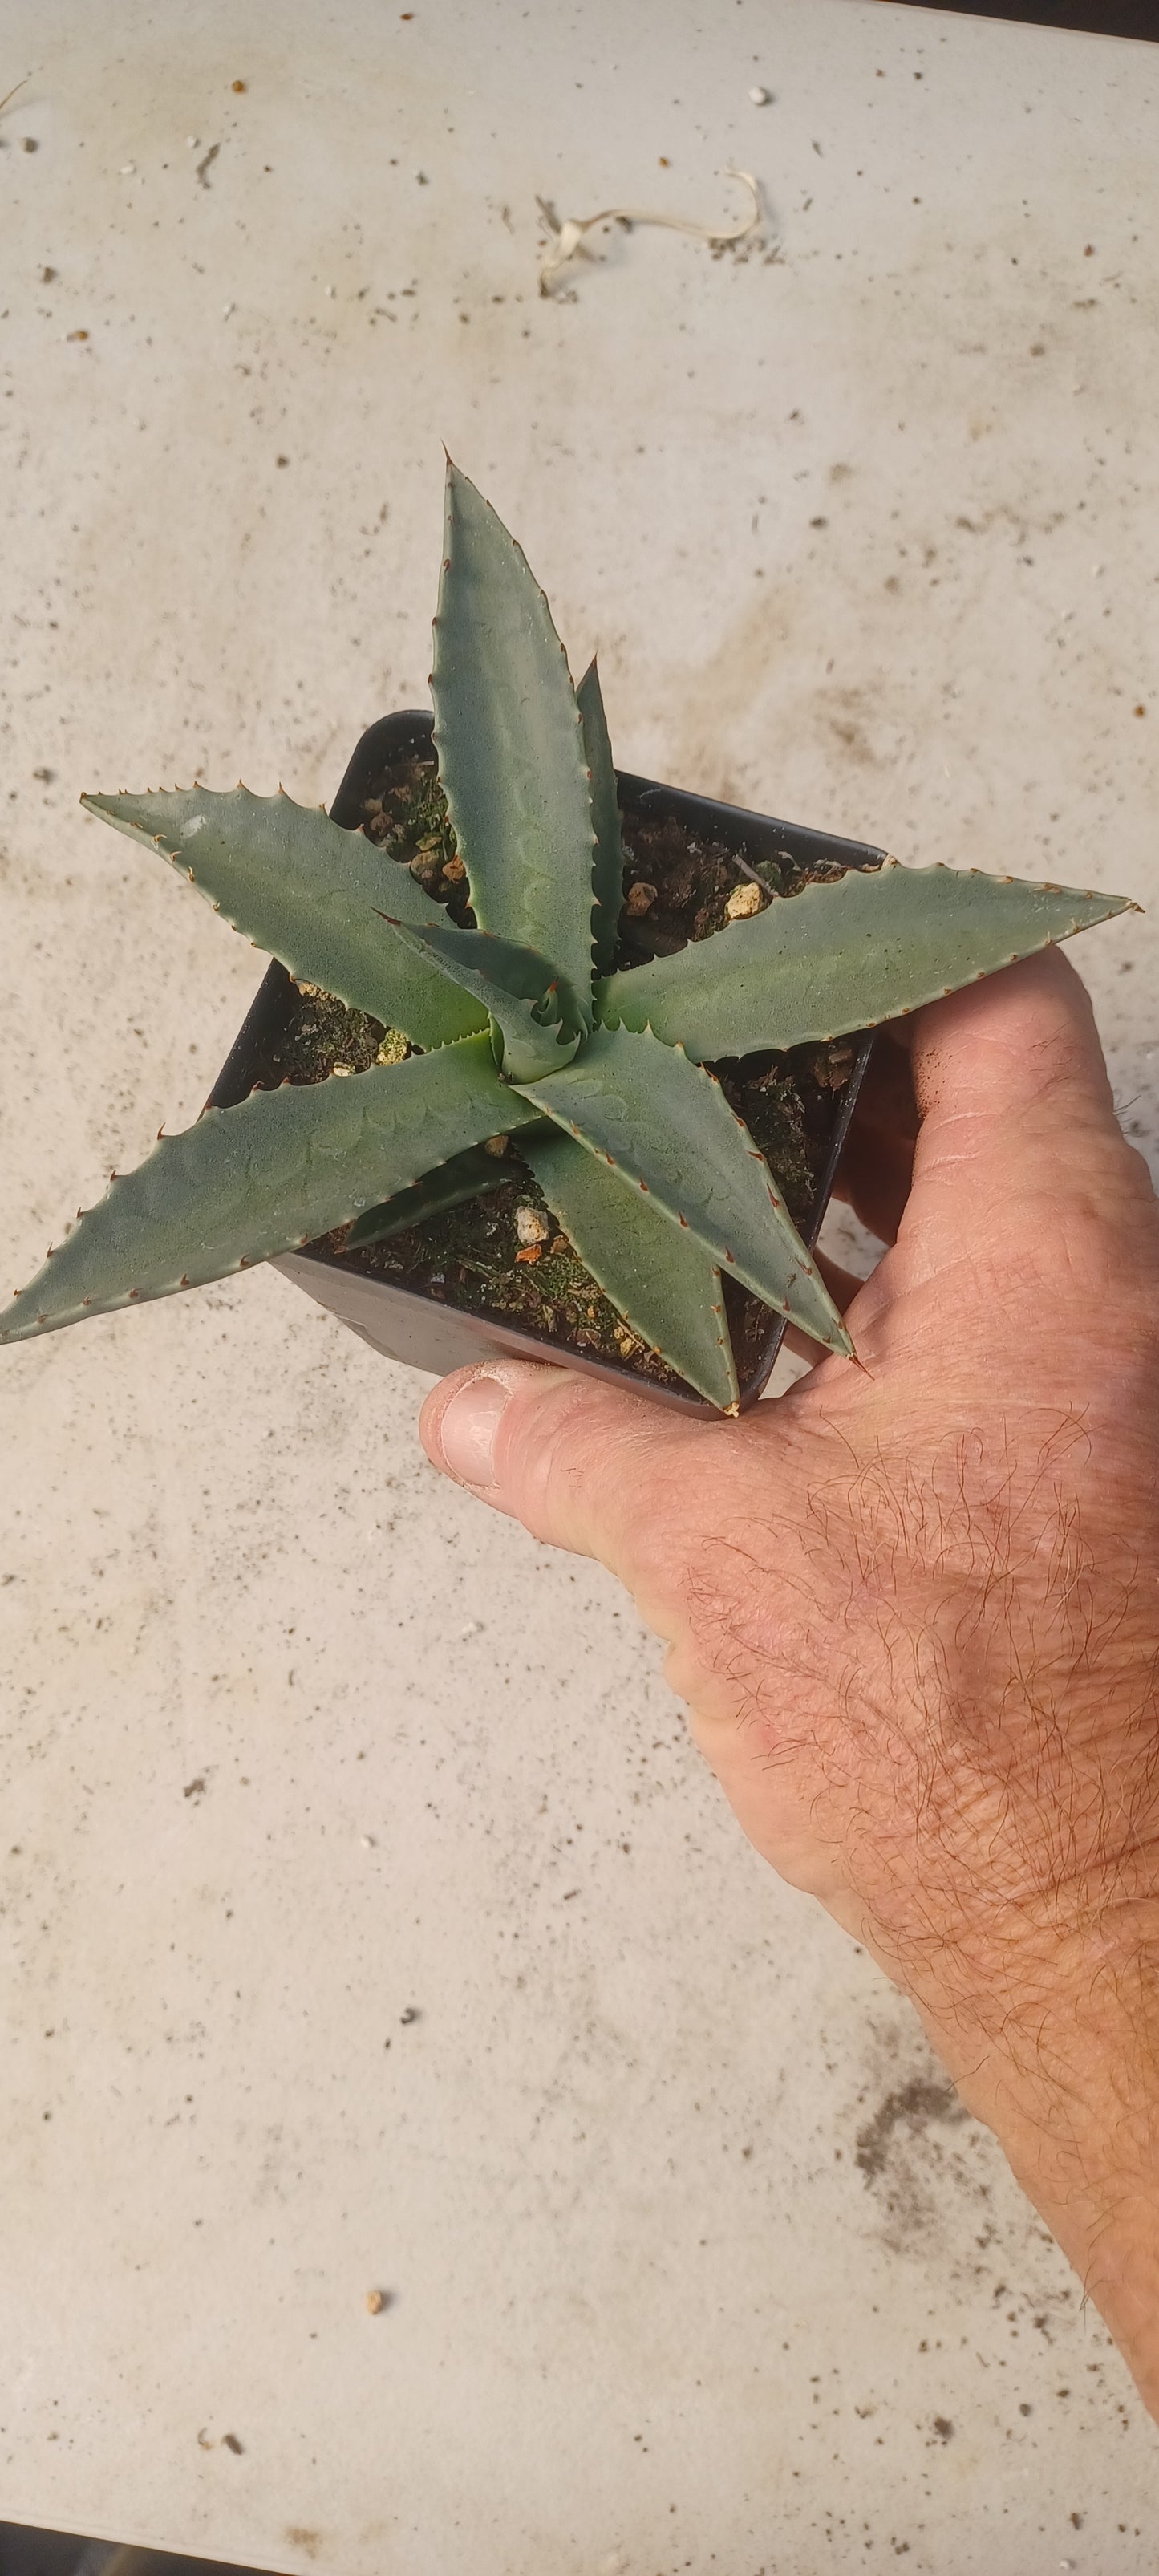 AG001: Agave parryi v neomexicana COLD HARDY CACTUS